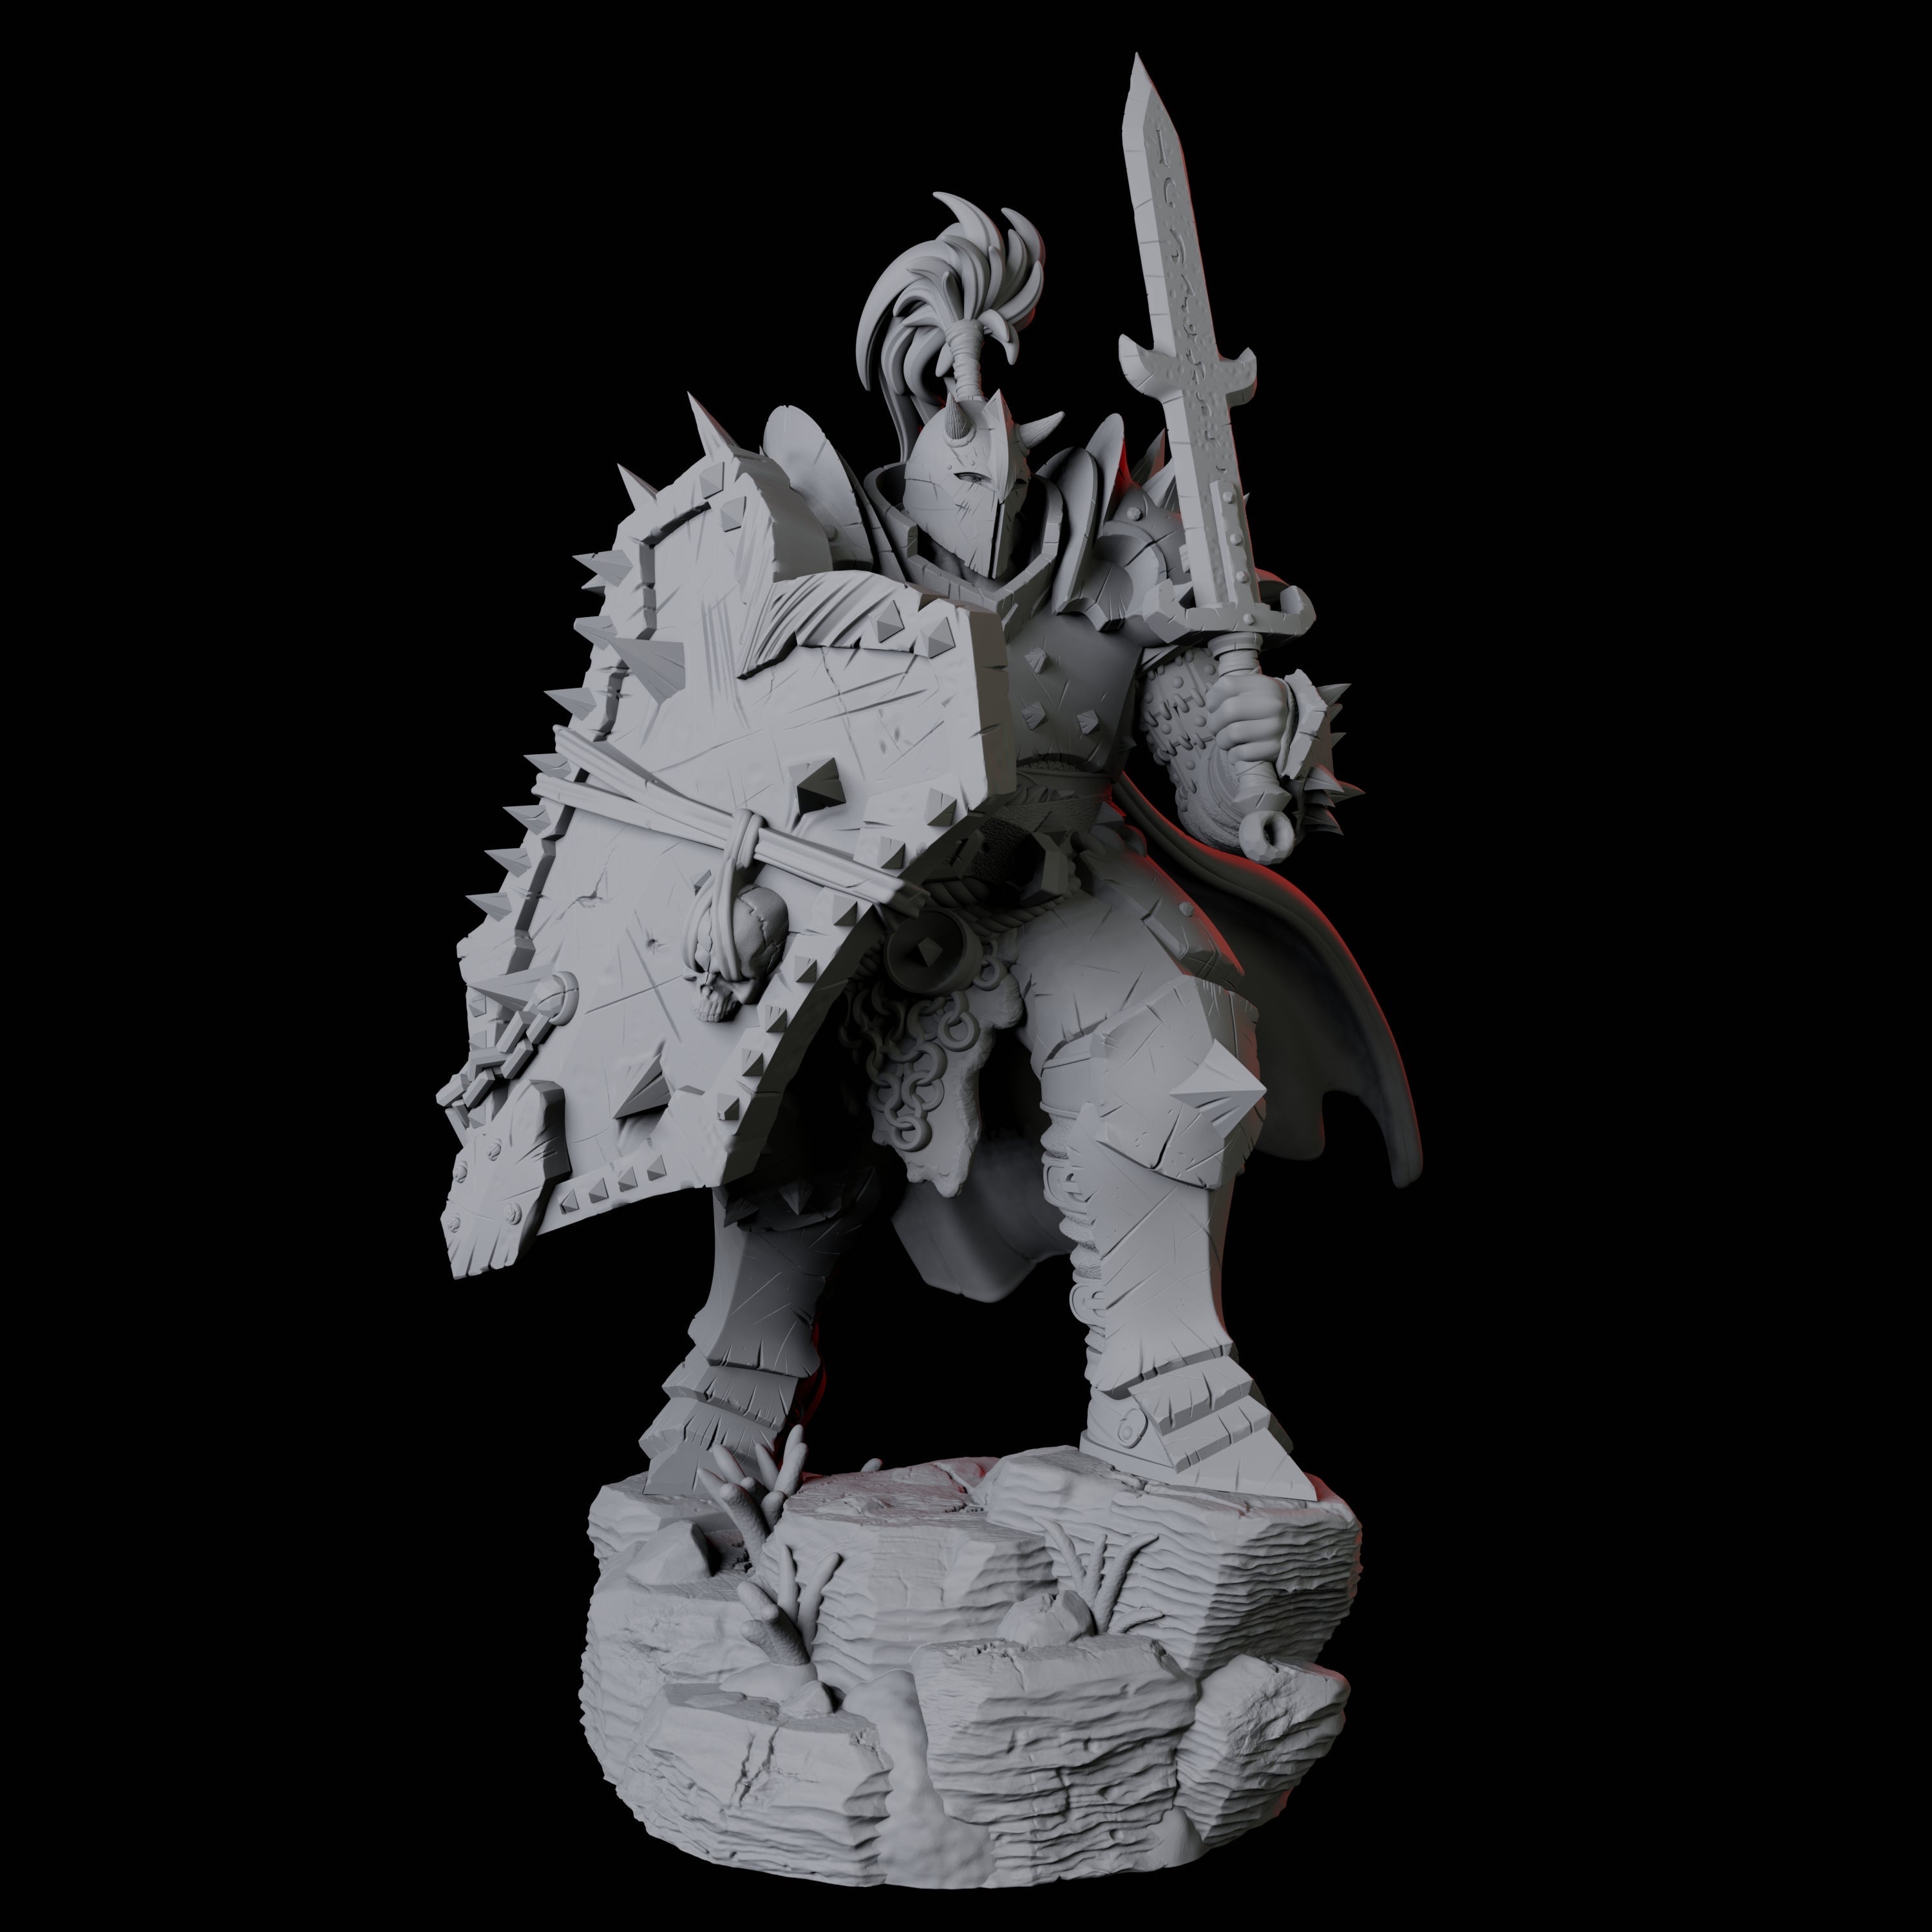 Hulking Armoured Barbarian C Miniature for Dungeons and Dragons, Pathfinder or other TTRPGs